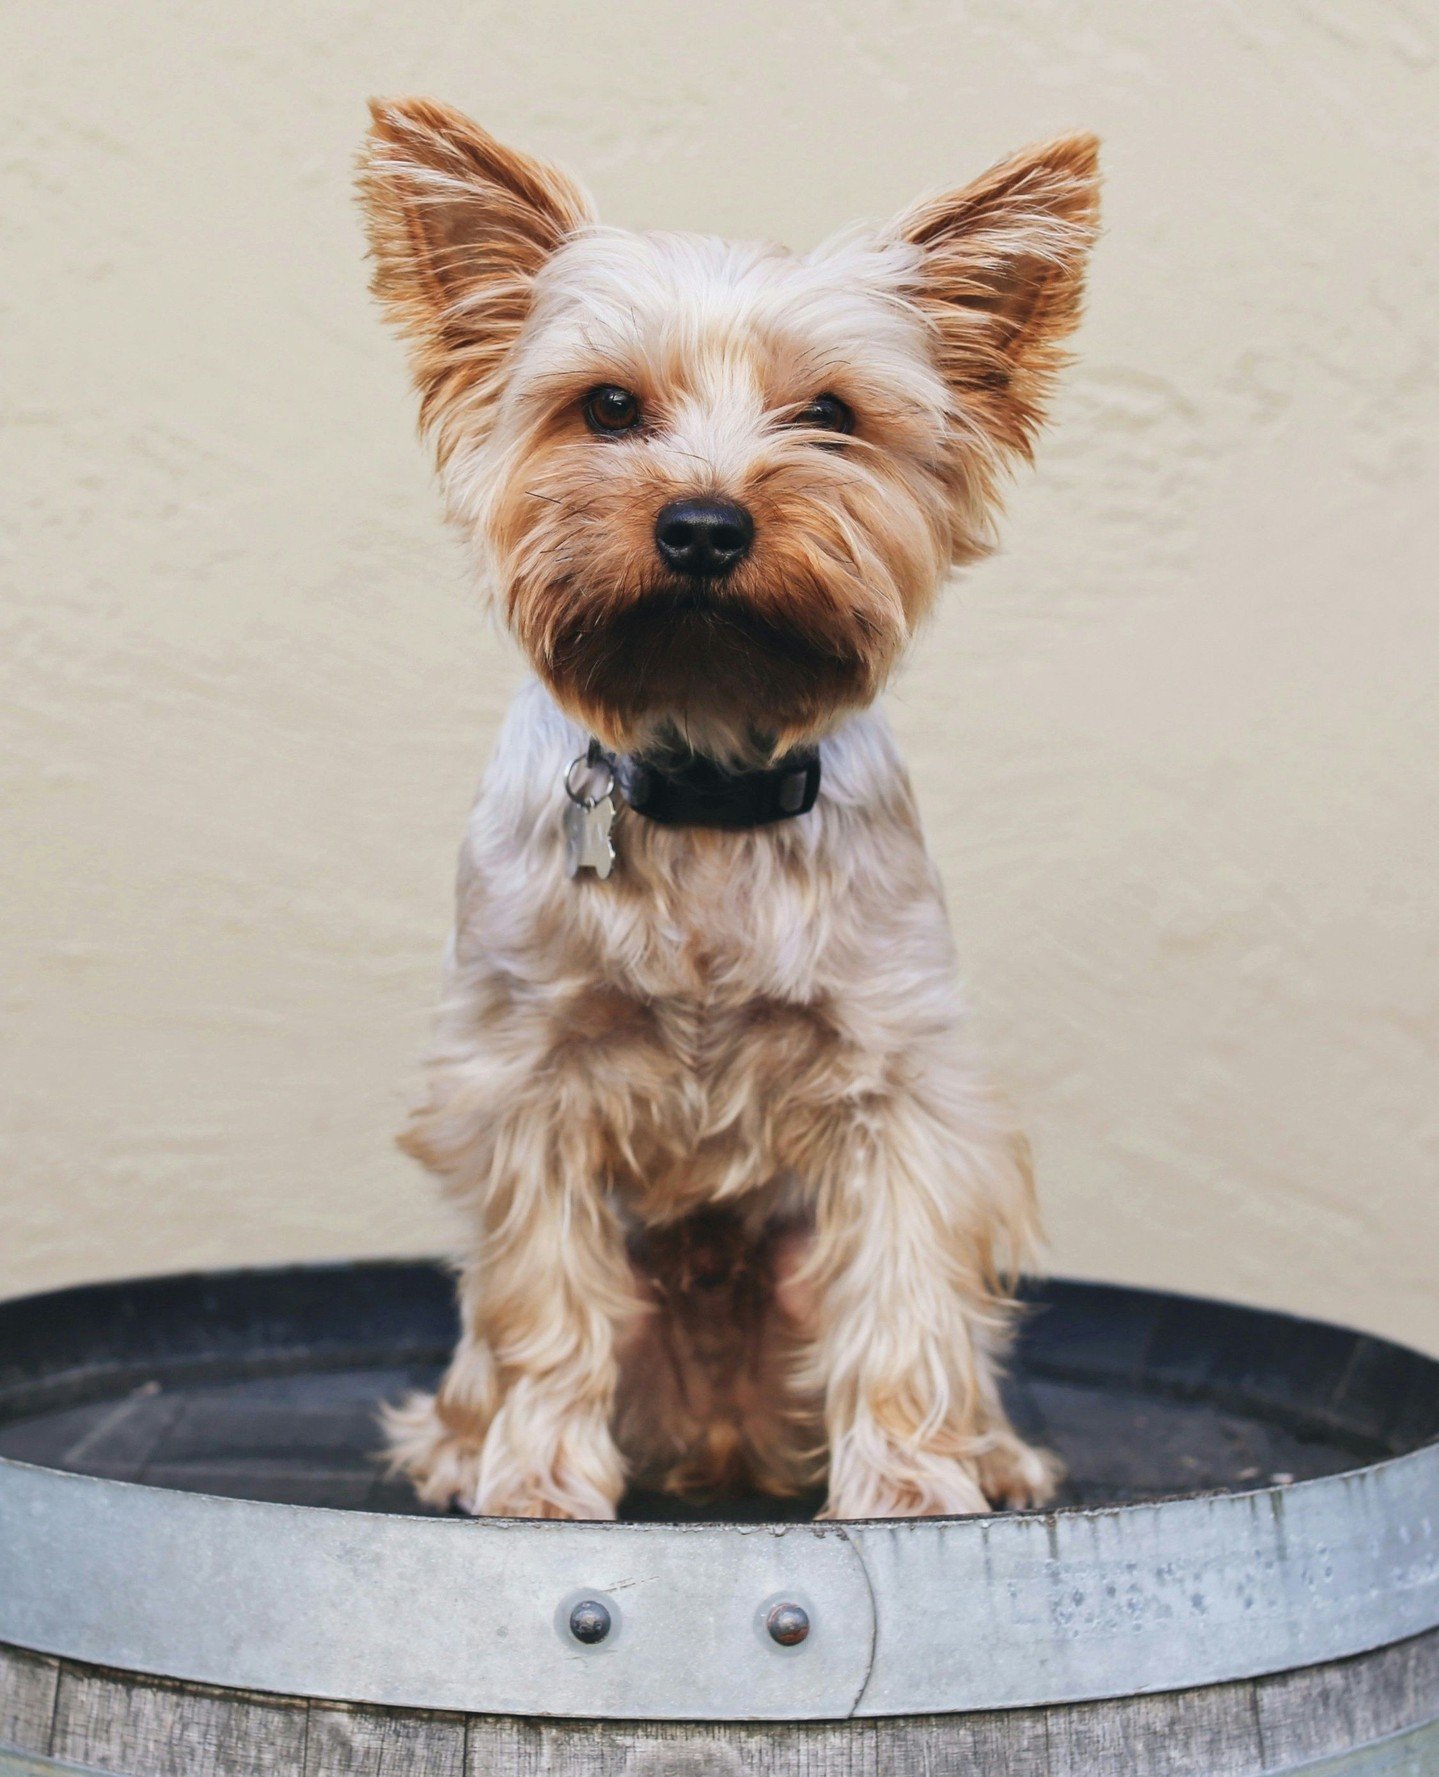 Spend a paw-some afternoon at Vasco Row on April 14 for Wine &amp; Wags! 🐾🍷⁠
⁠
Enjoy wine pours from nine wineries, pet-themed gifts, live music, and more! Plus, meet adorable dogs looking for their forever homes.⁠
⁠
25% of proceeds from ticket sal